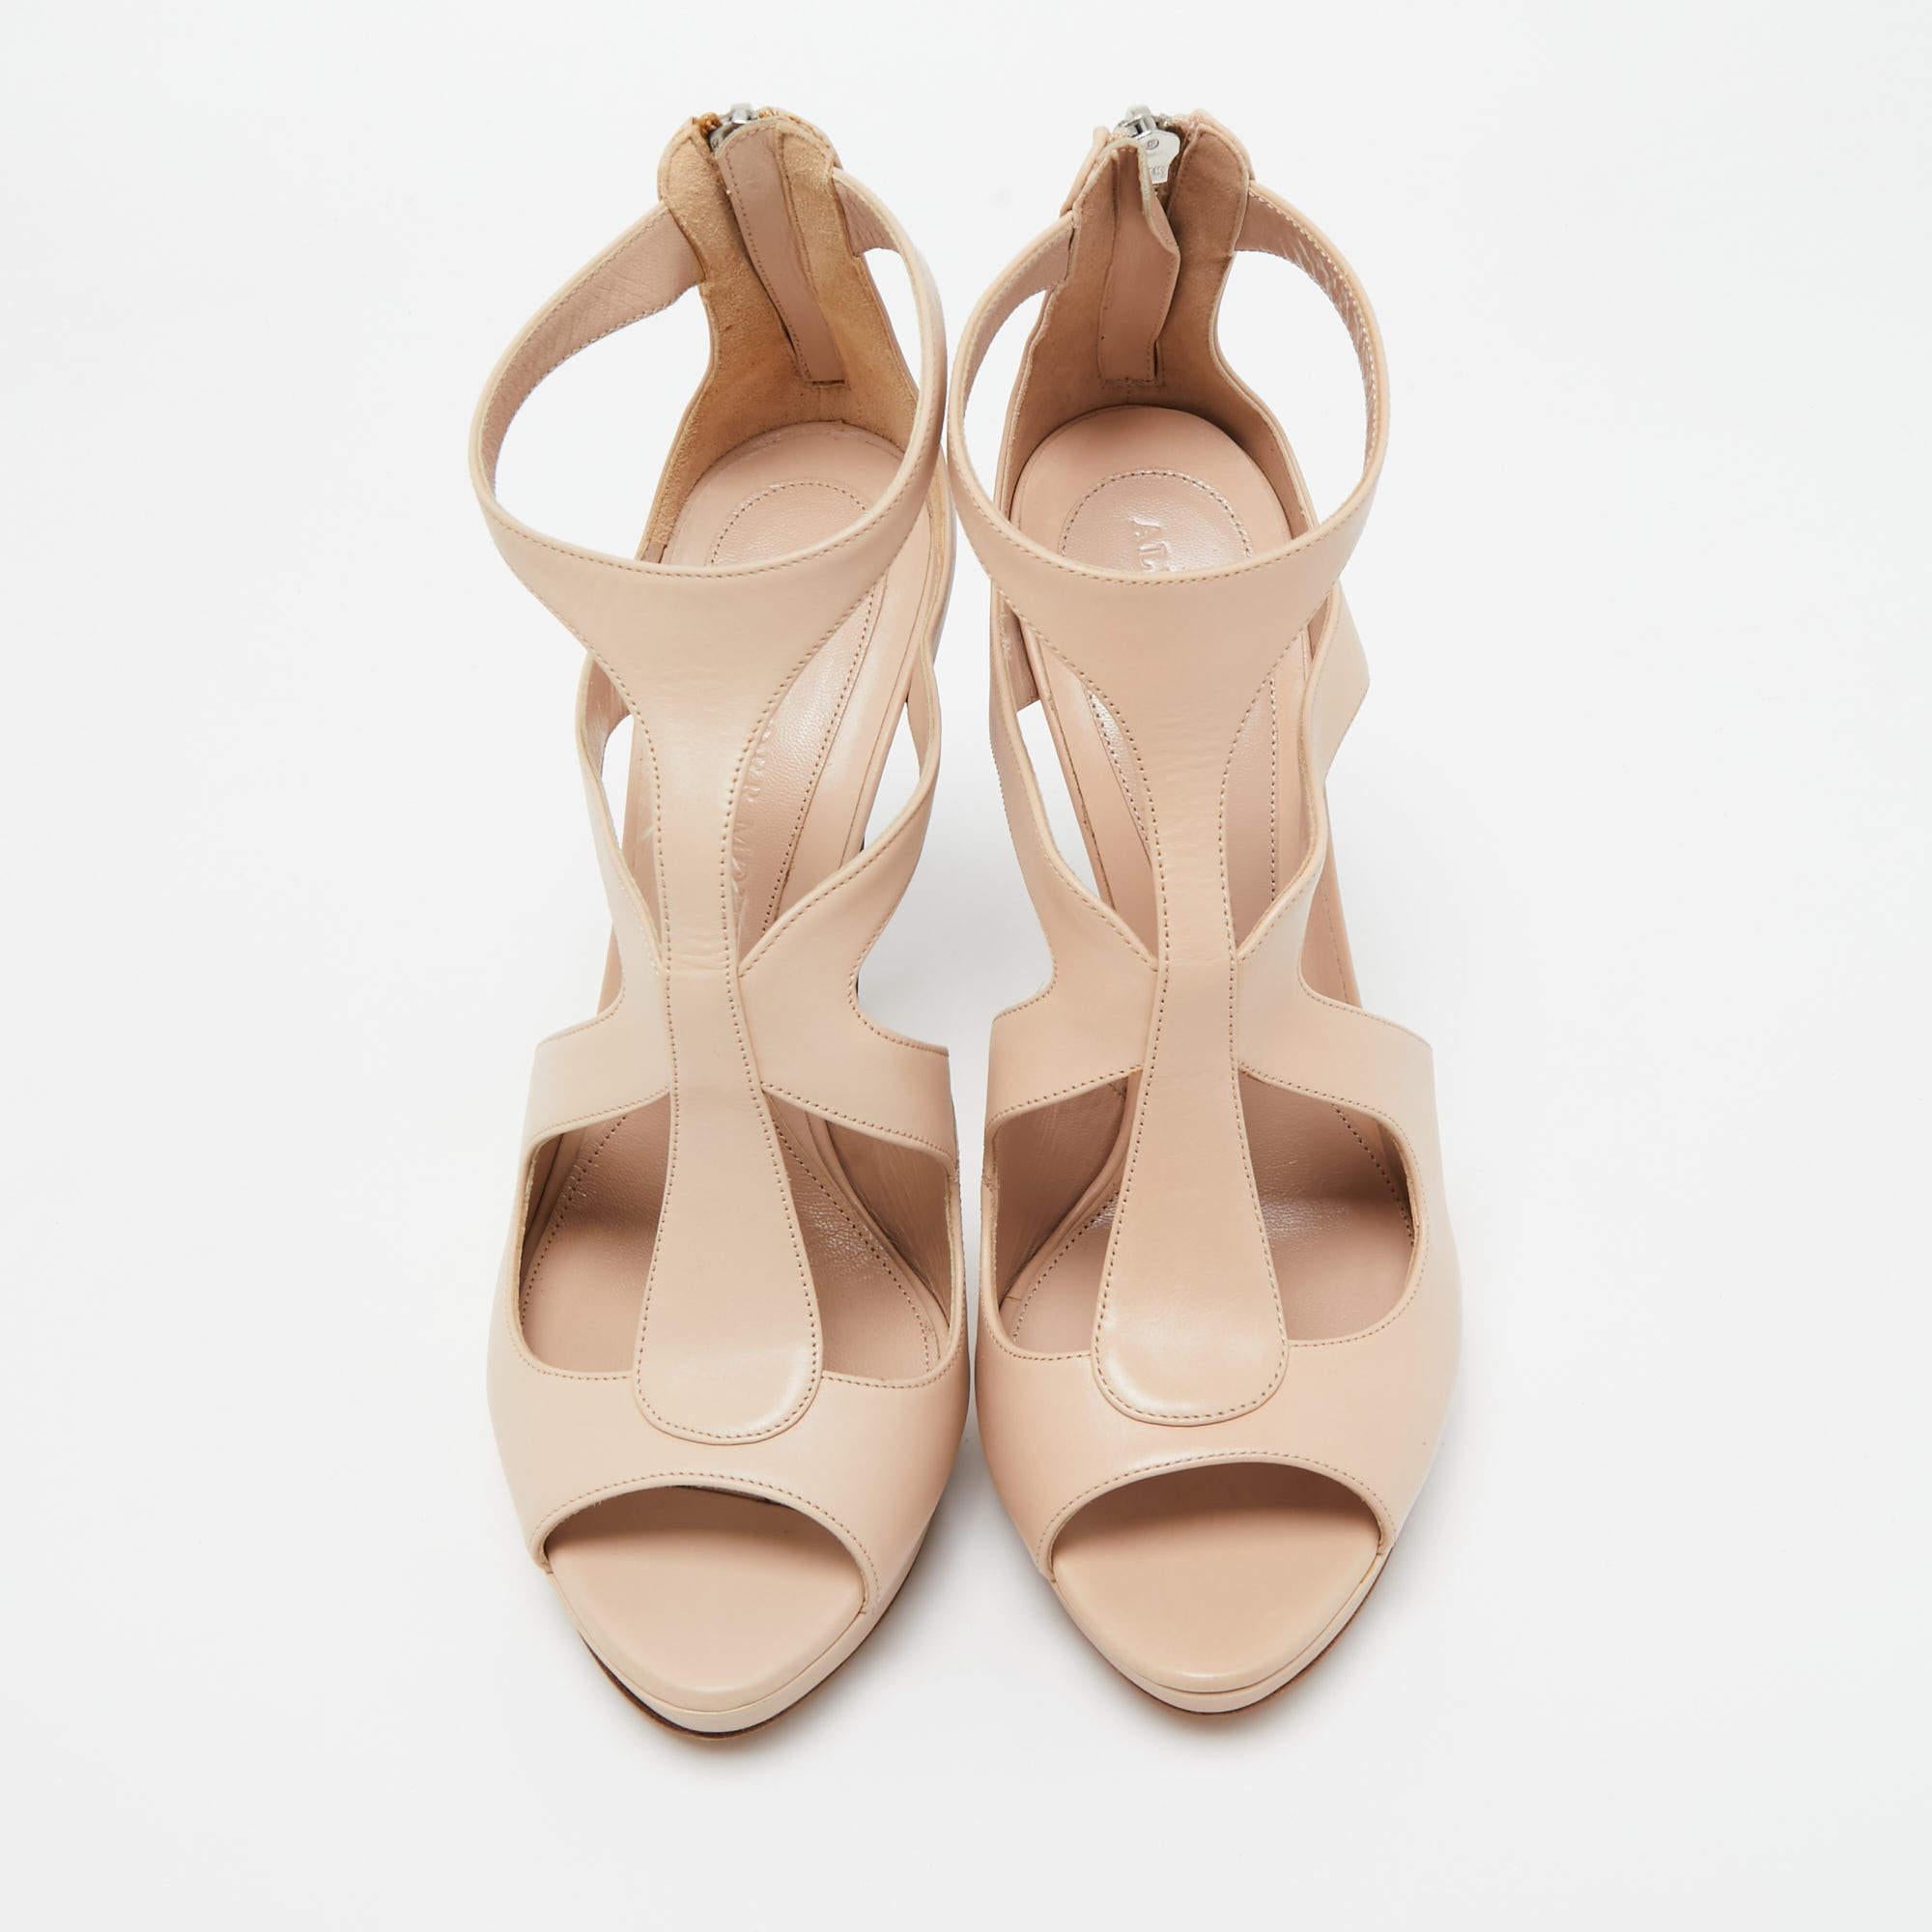 Wonderfully crafted shoes added with notable elements to fit well and pair perfectly with all your plans. Make these Alexander McQueen beige sandals yours today!

Includes: Original Box, Info Booklet

